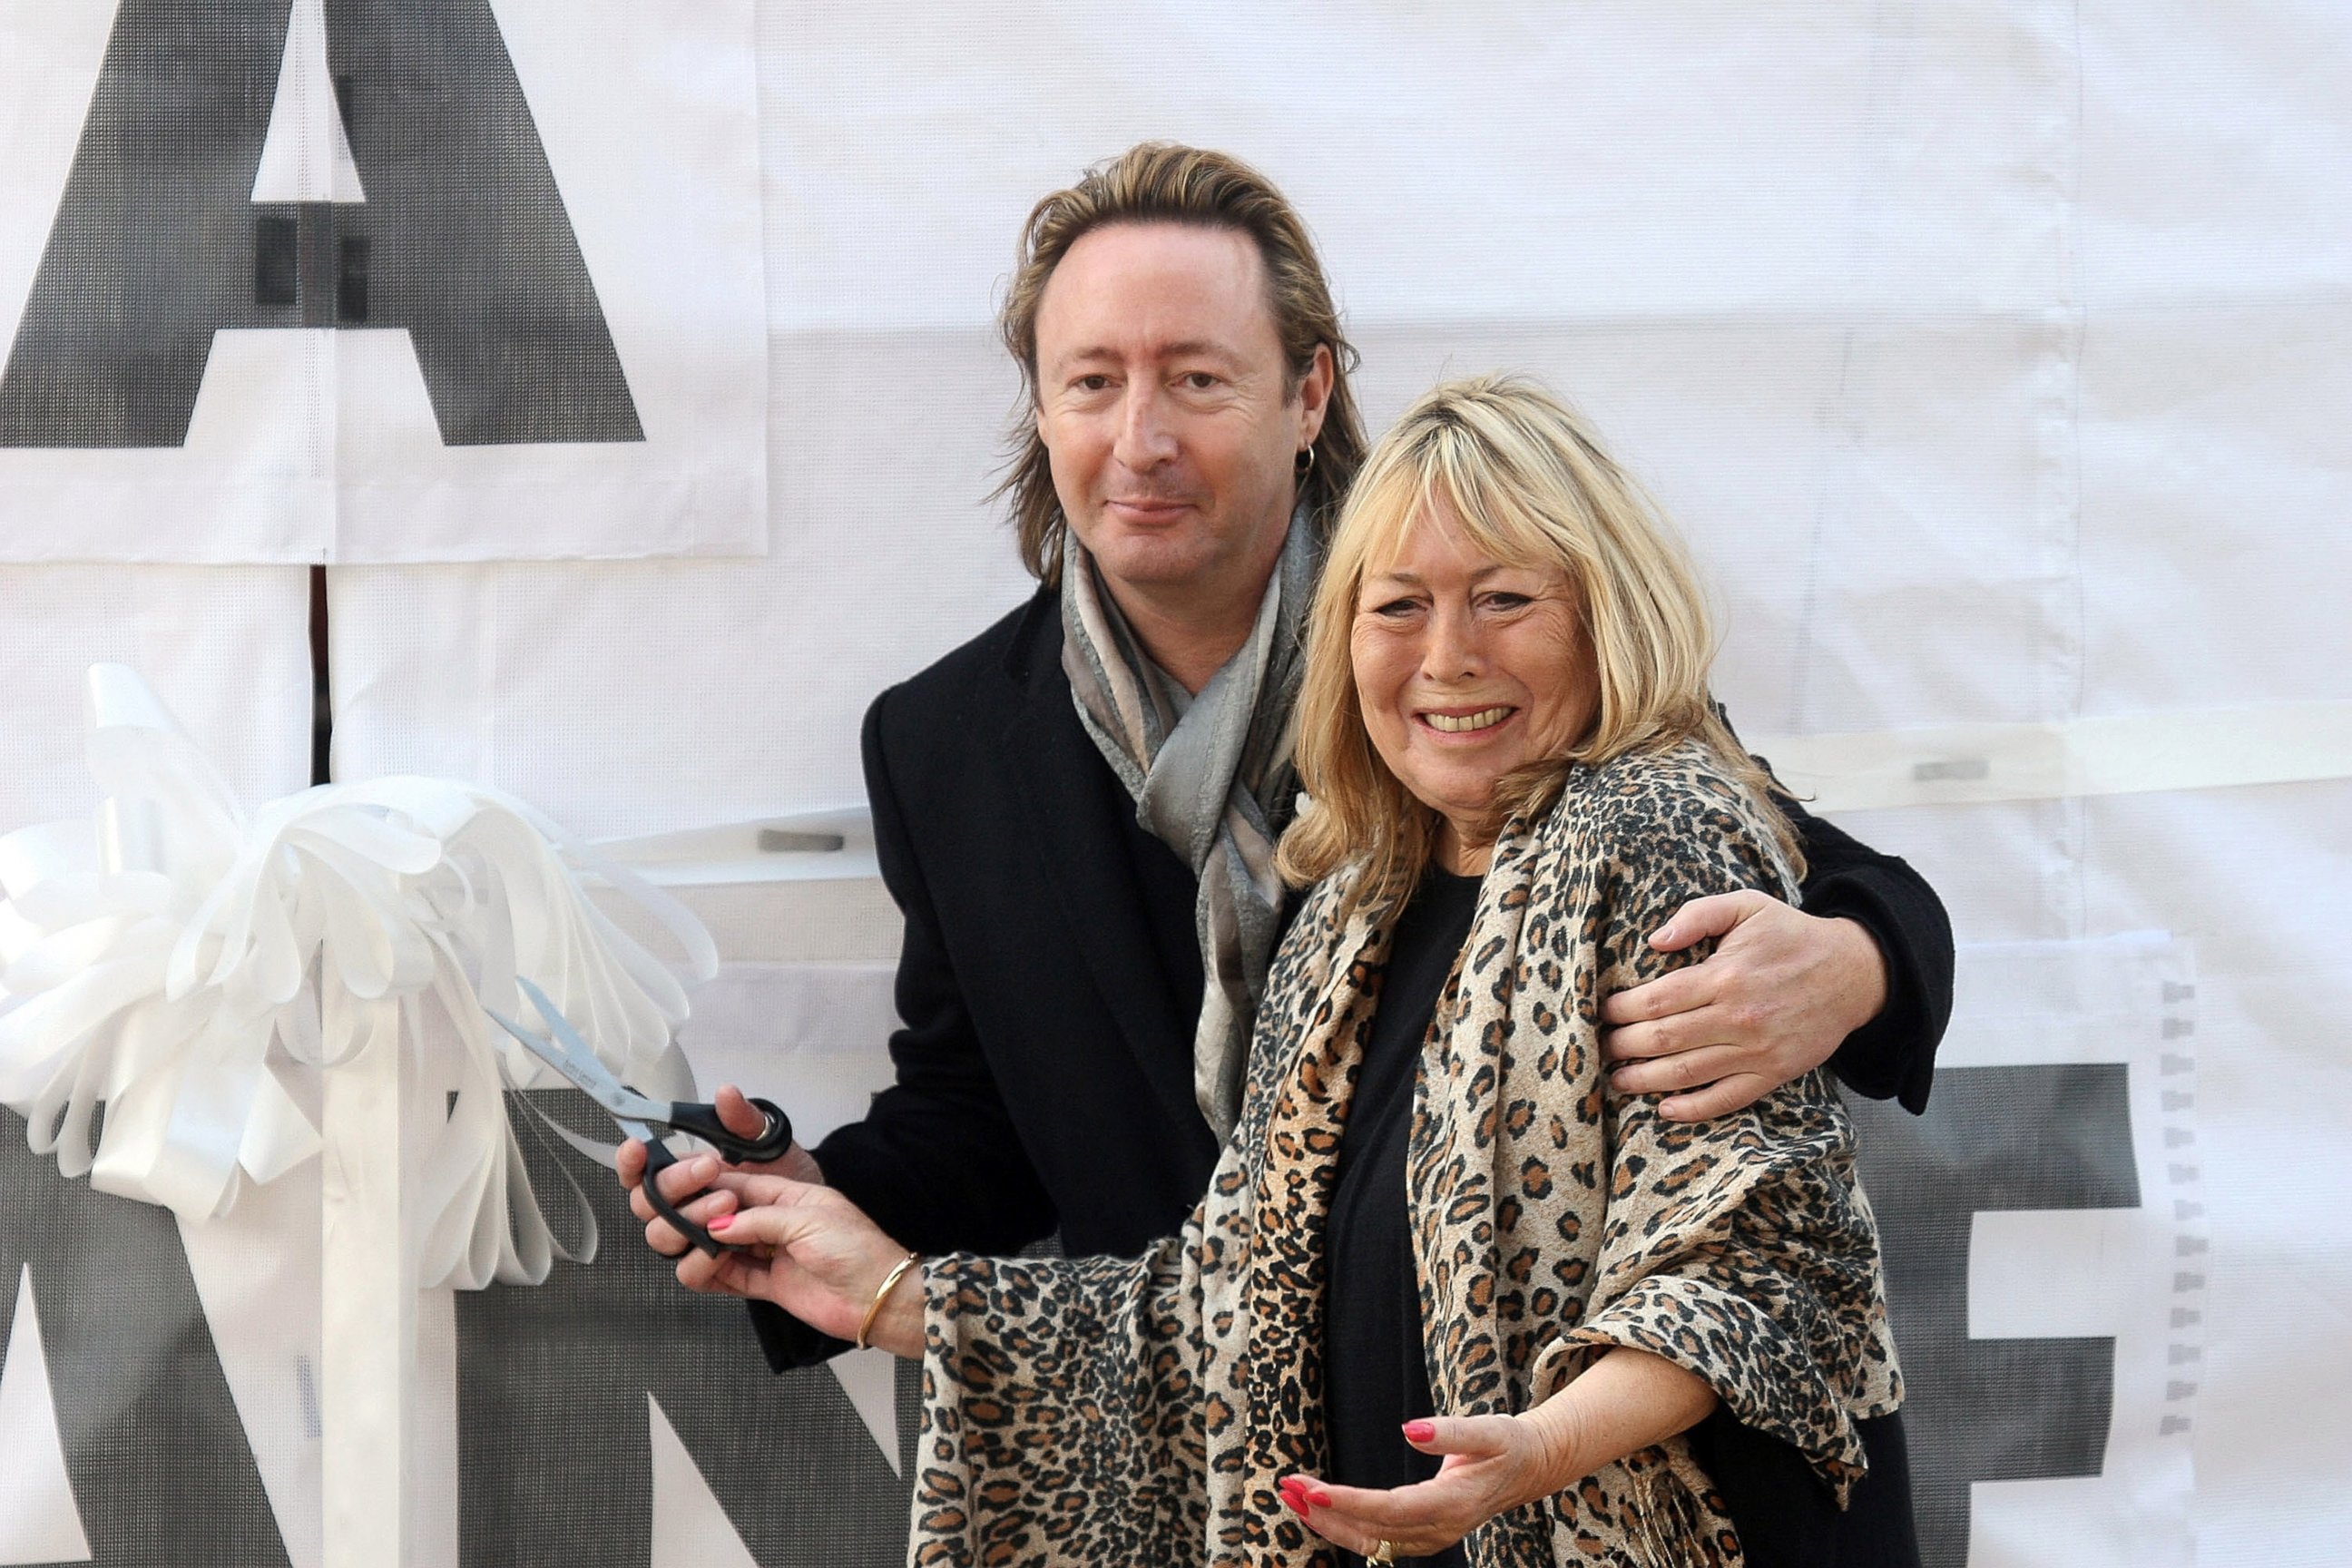 PHOTO: Julian Lennon and Cynthia Lennon, the son and first wife of John Lennon, attend the unveiling of the John Lennon monument 'Peace & Harmony' at Chavasse Park, Oct. 9, 2010, in Liverpool, England.